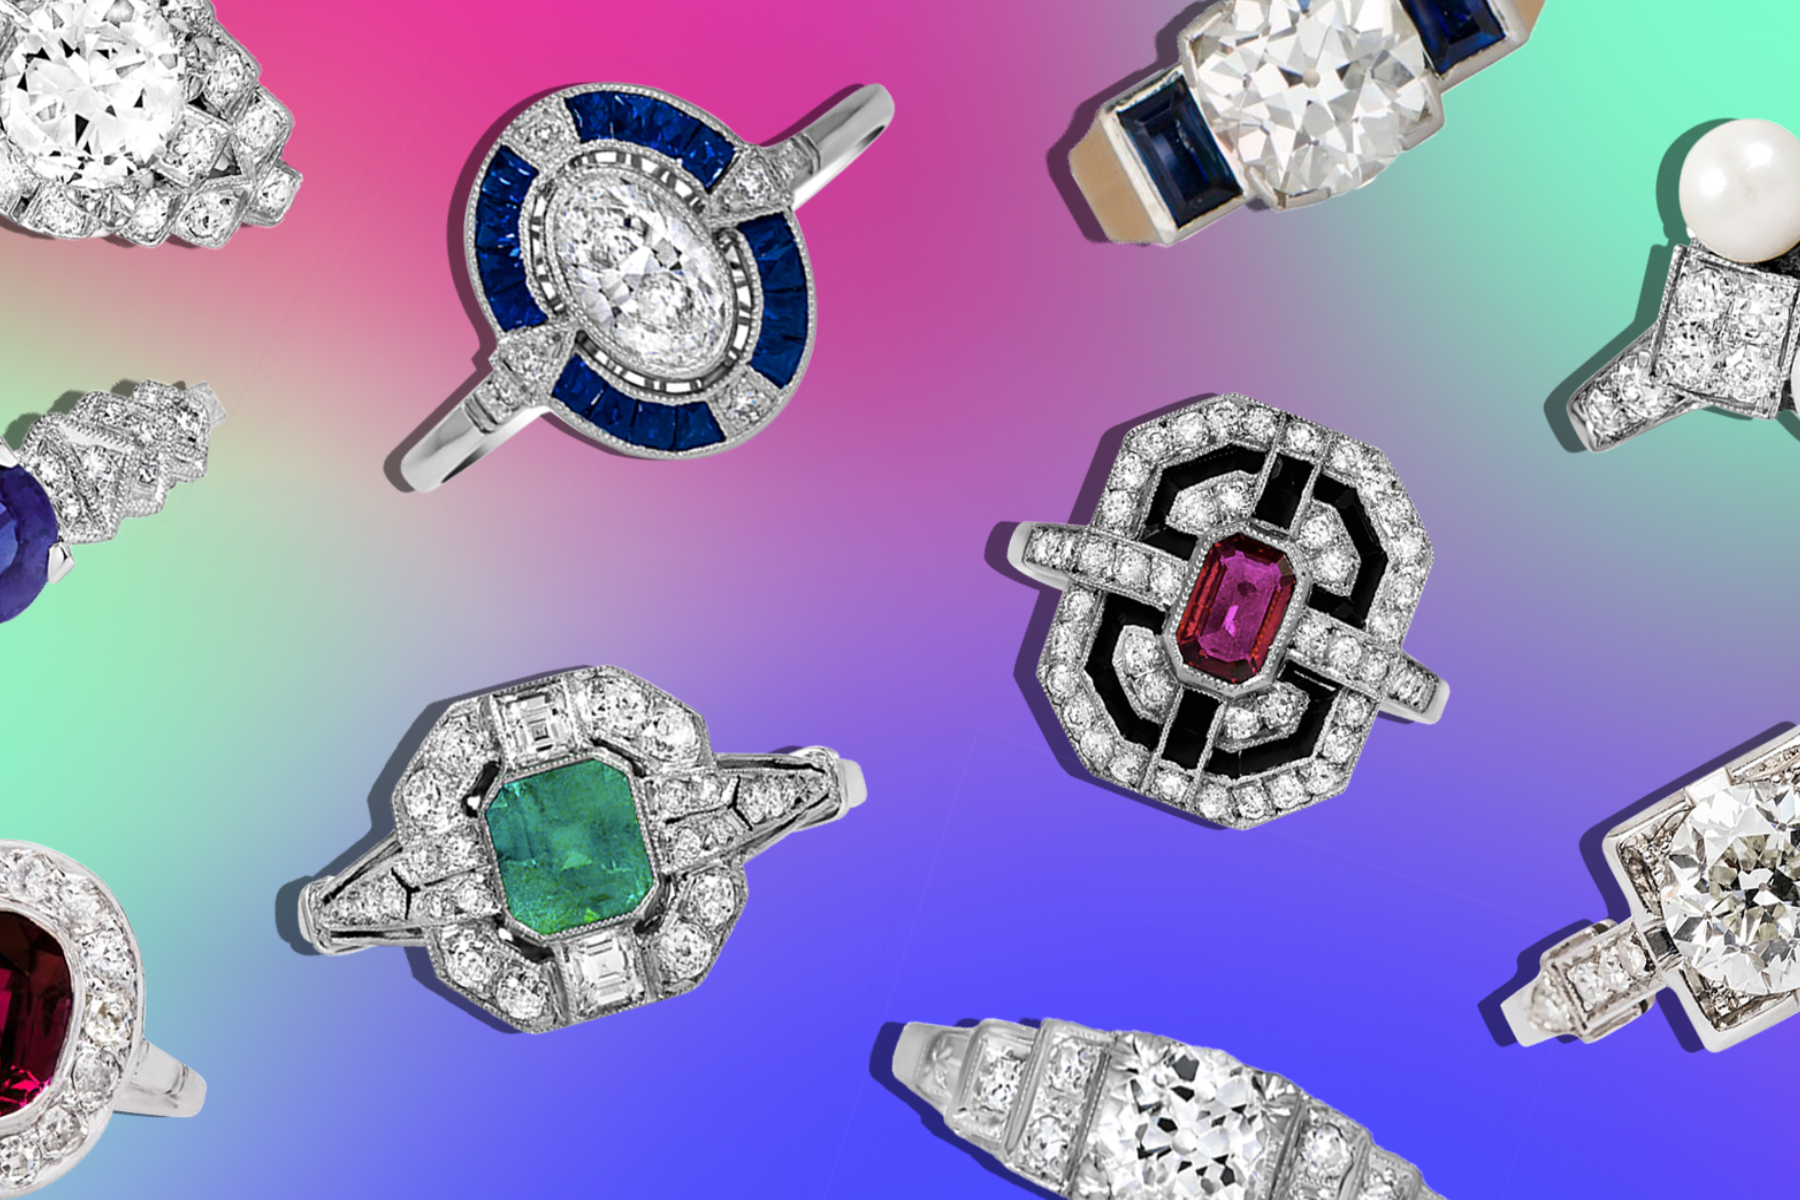 Art Deco rings in a variety of shapes and styles